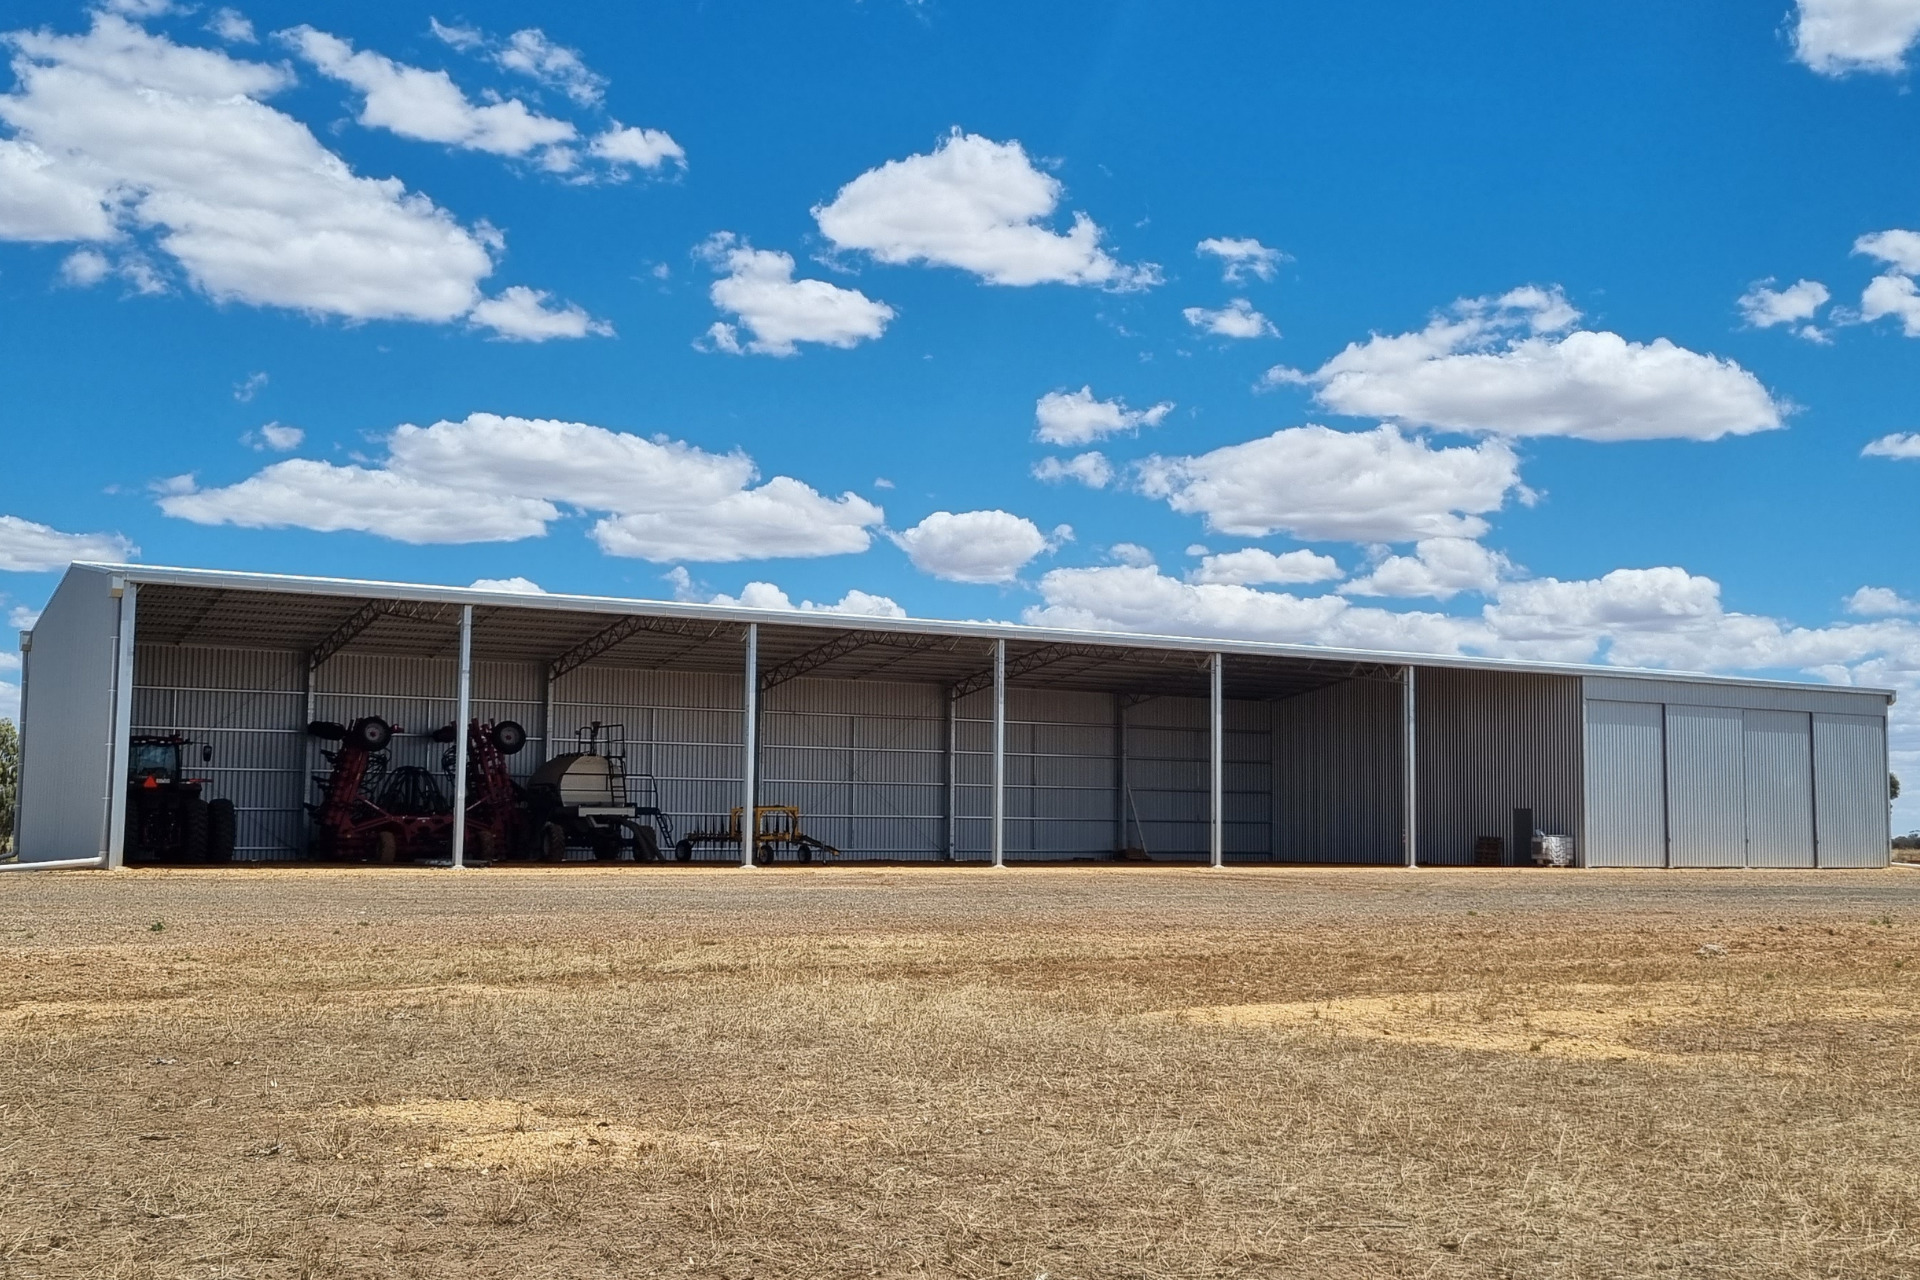 You are currently viewing A 64m x 18m x 6m machinery shed with enclosed bays